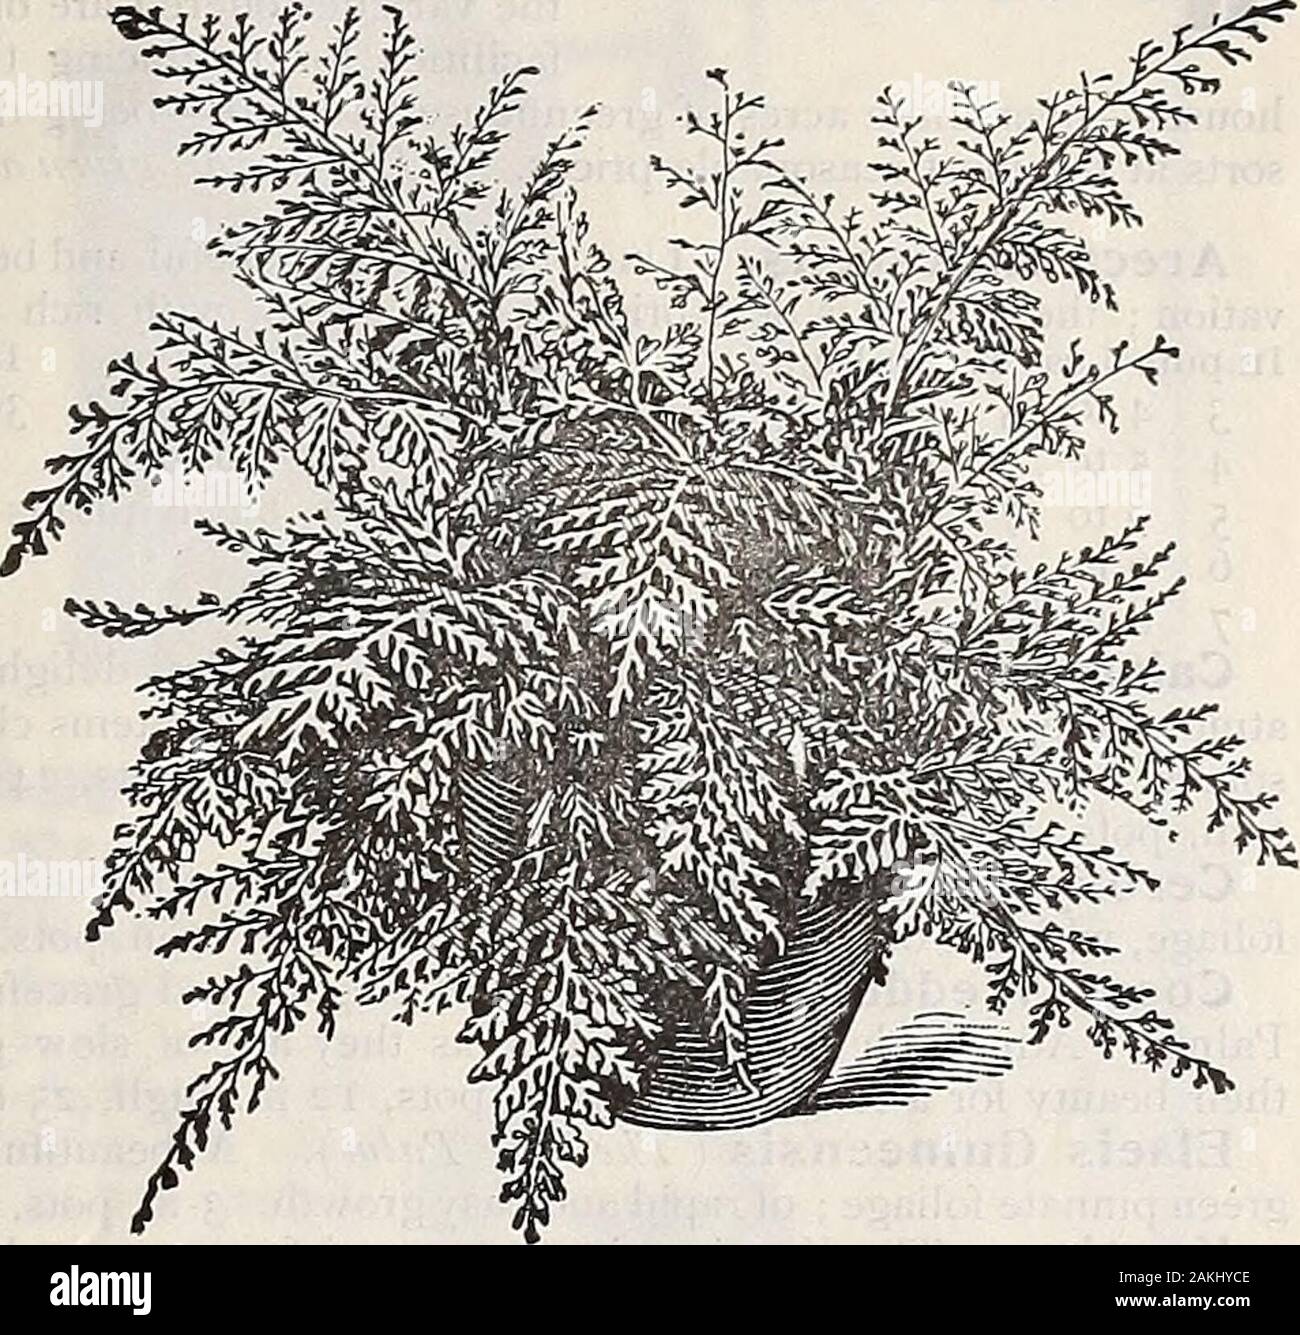 Dreer's mid-summer catalogue . of all the tree ferns andthe only variety which can be grown successfully in the living room ;it withstands the dry atmosphere and dust with as much impunity asthe hardiest palm. It isof spreading habit, withlong, arching, light greenfronds of graceful appear-ance. $1.00, $1.50 and$2.50 each. Davallia Stricta. A mostdecorative, dwarf growingfern with finely divided pin-na ; makes a pretty tableplant. 15 cts. and 25cts. each. Davallia Fijiensis Plu- ^, mosa. One of the ^fffflffni finest species in cultiva-tion, and a grand fern inevery way, whether grownas a house Stock Photo